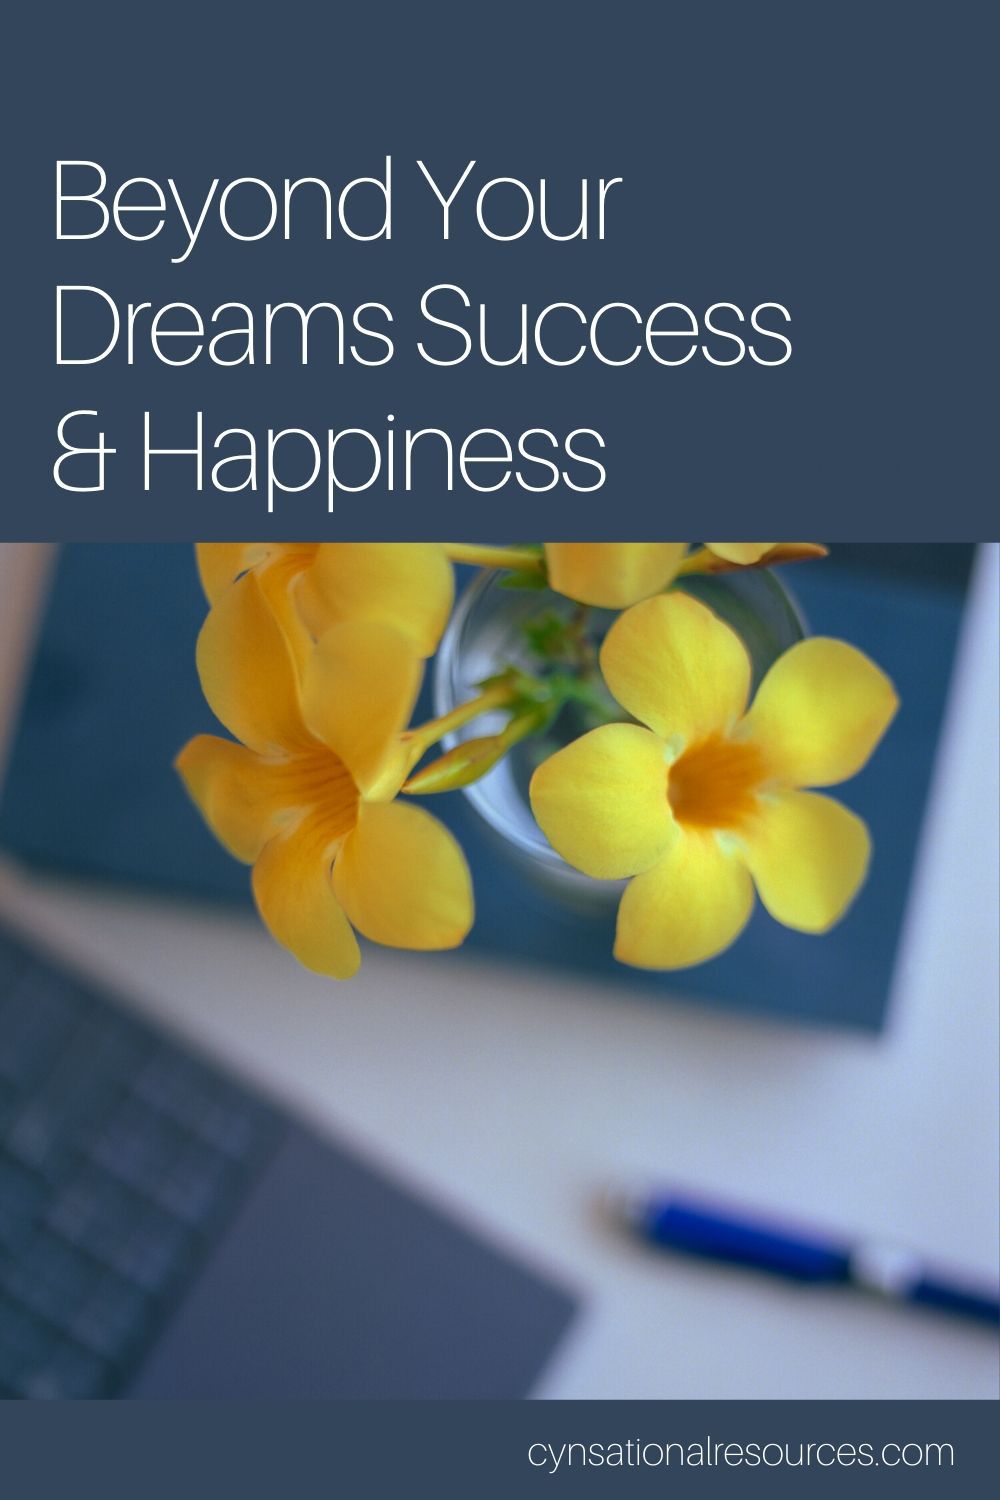 Change ONE thing for Beyond-Your-Dreams Success and Happiness